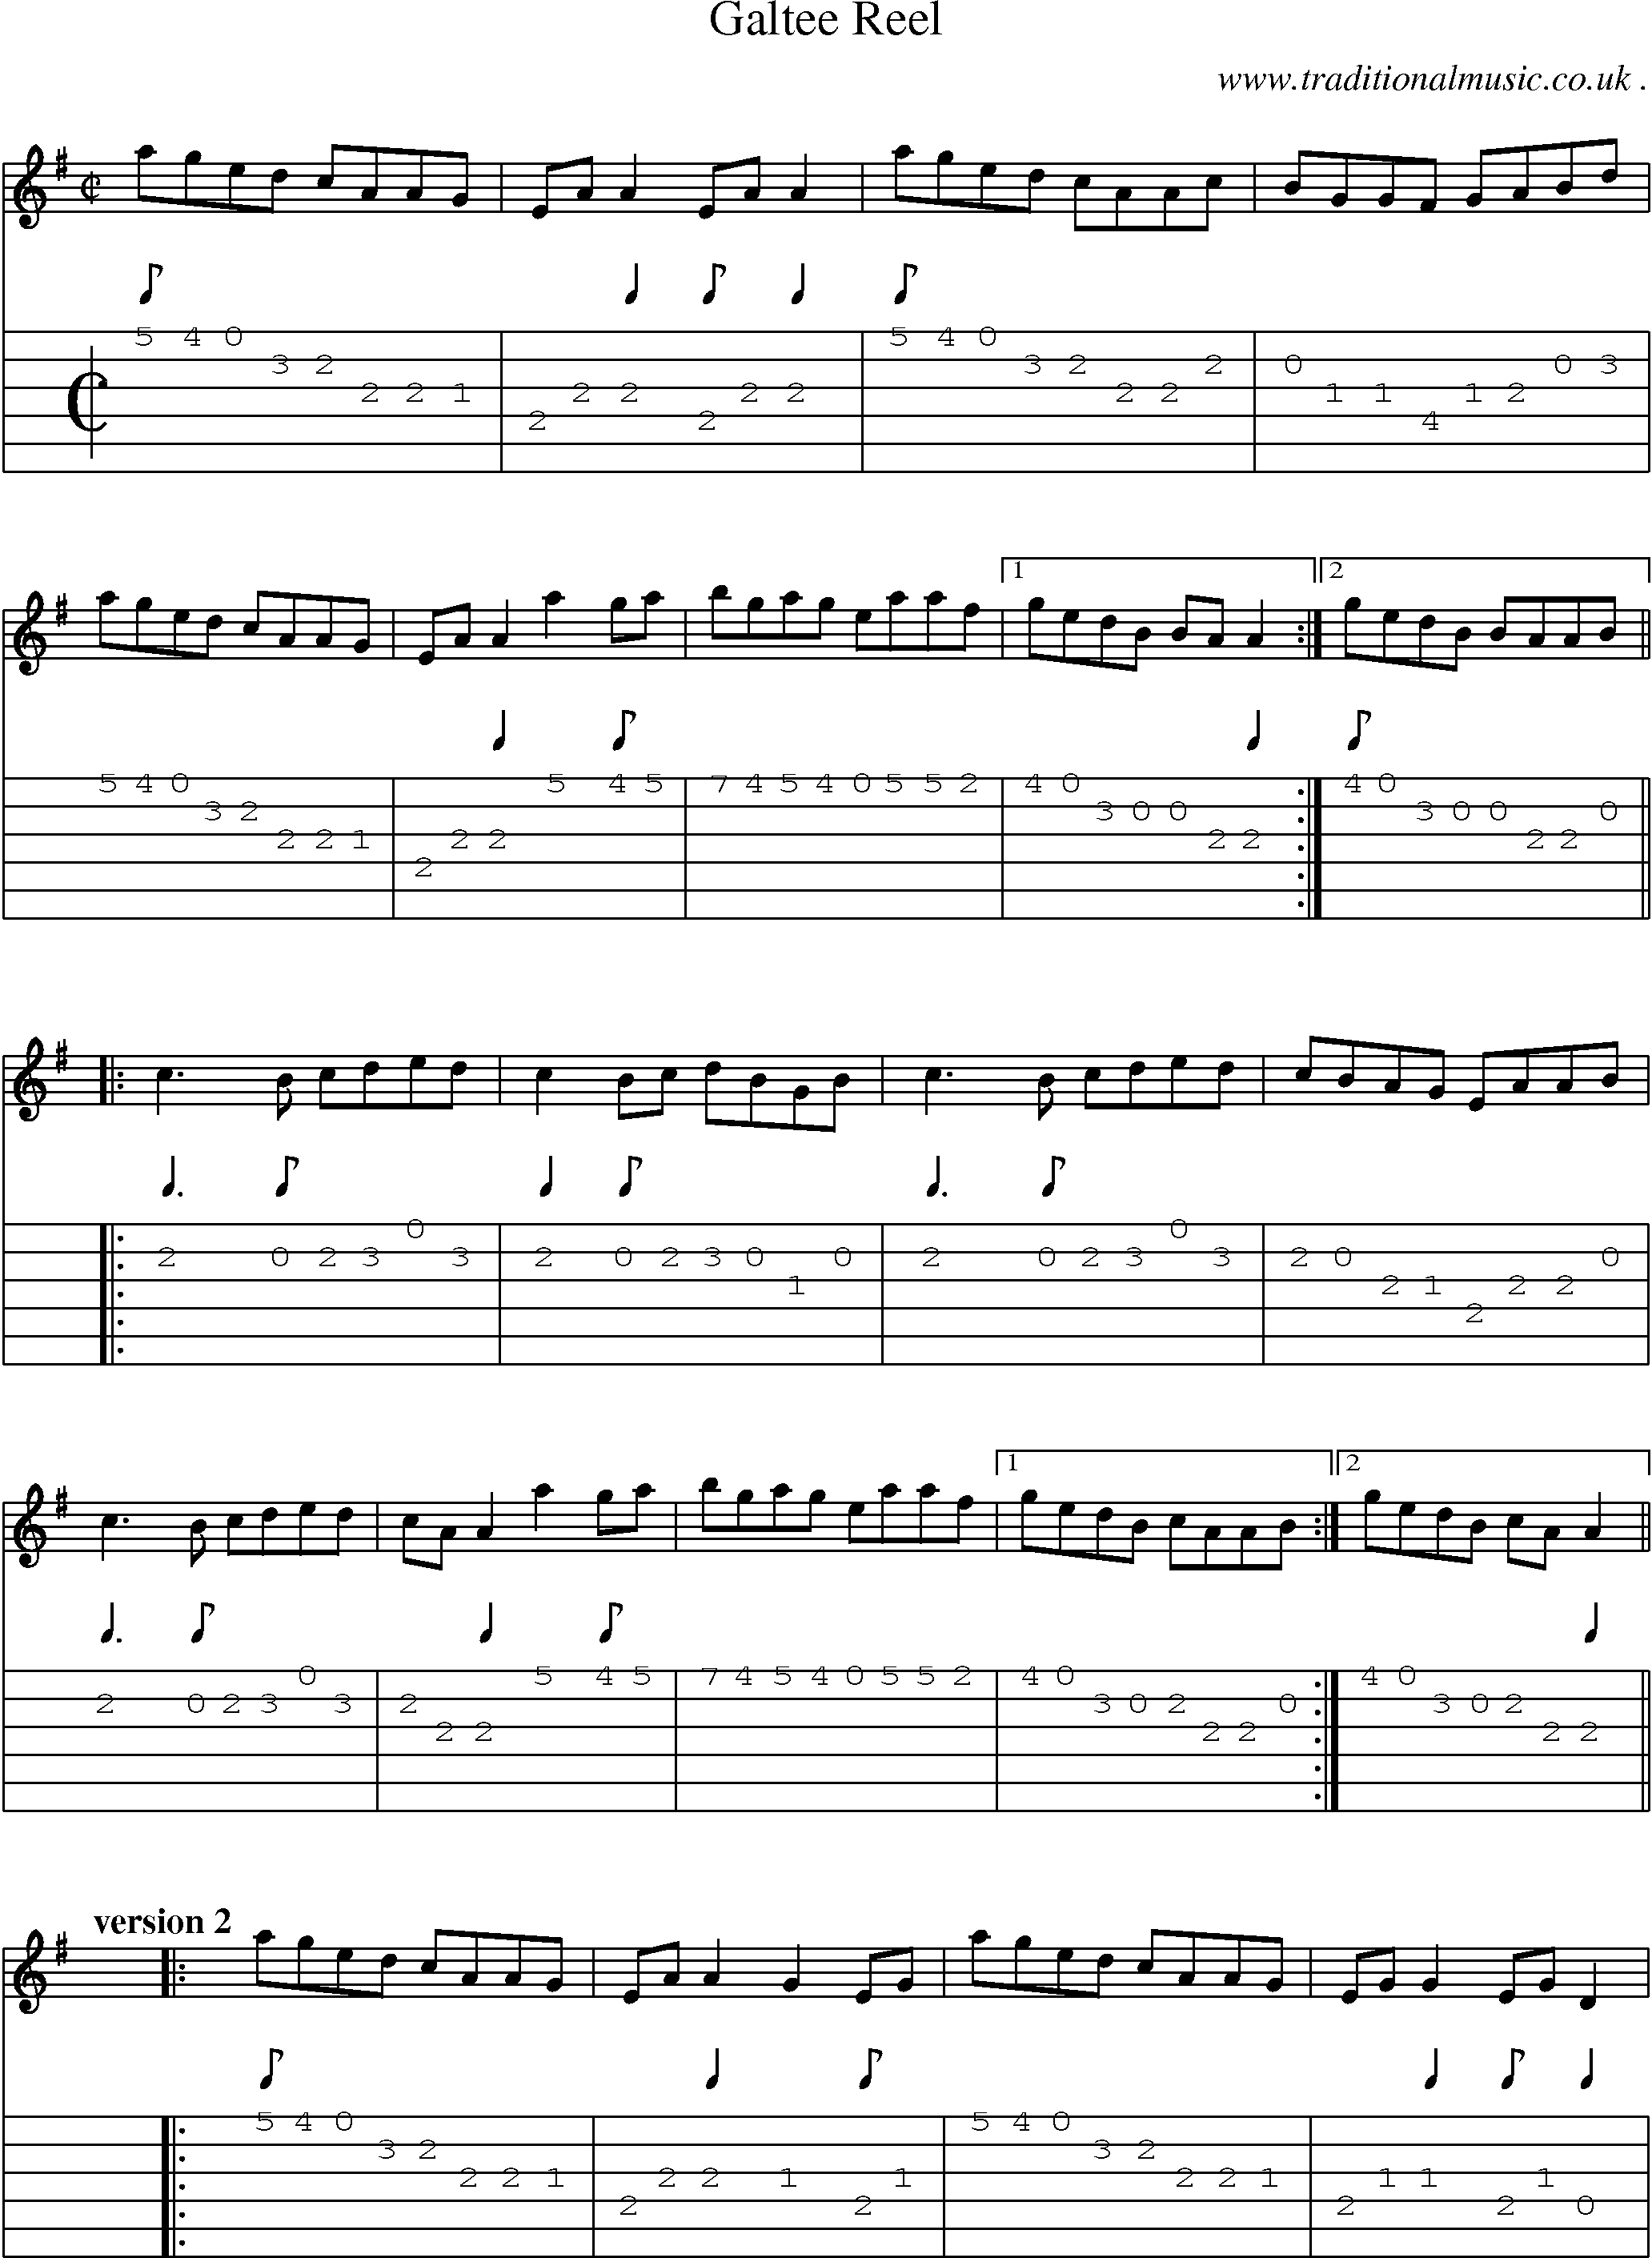 Sheet-Music and Guitar Tabs for Galtee Reel